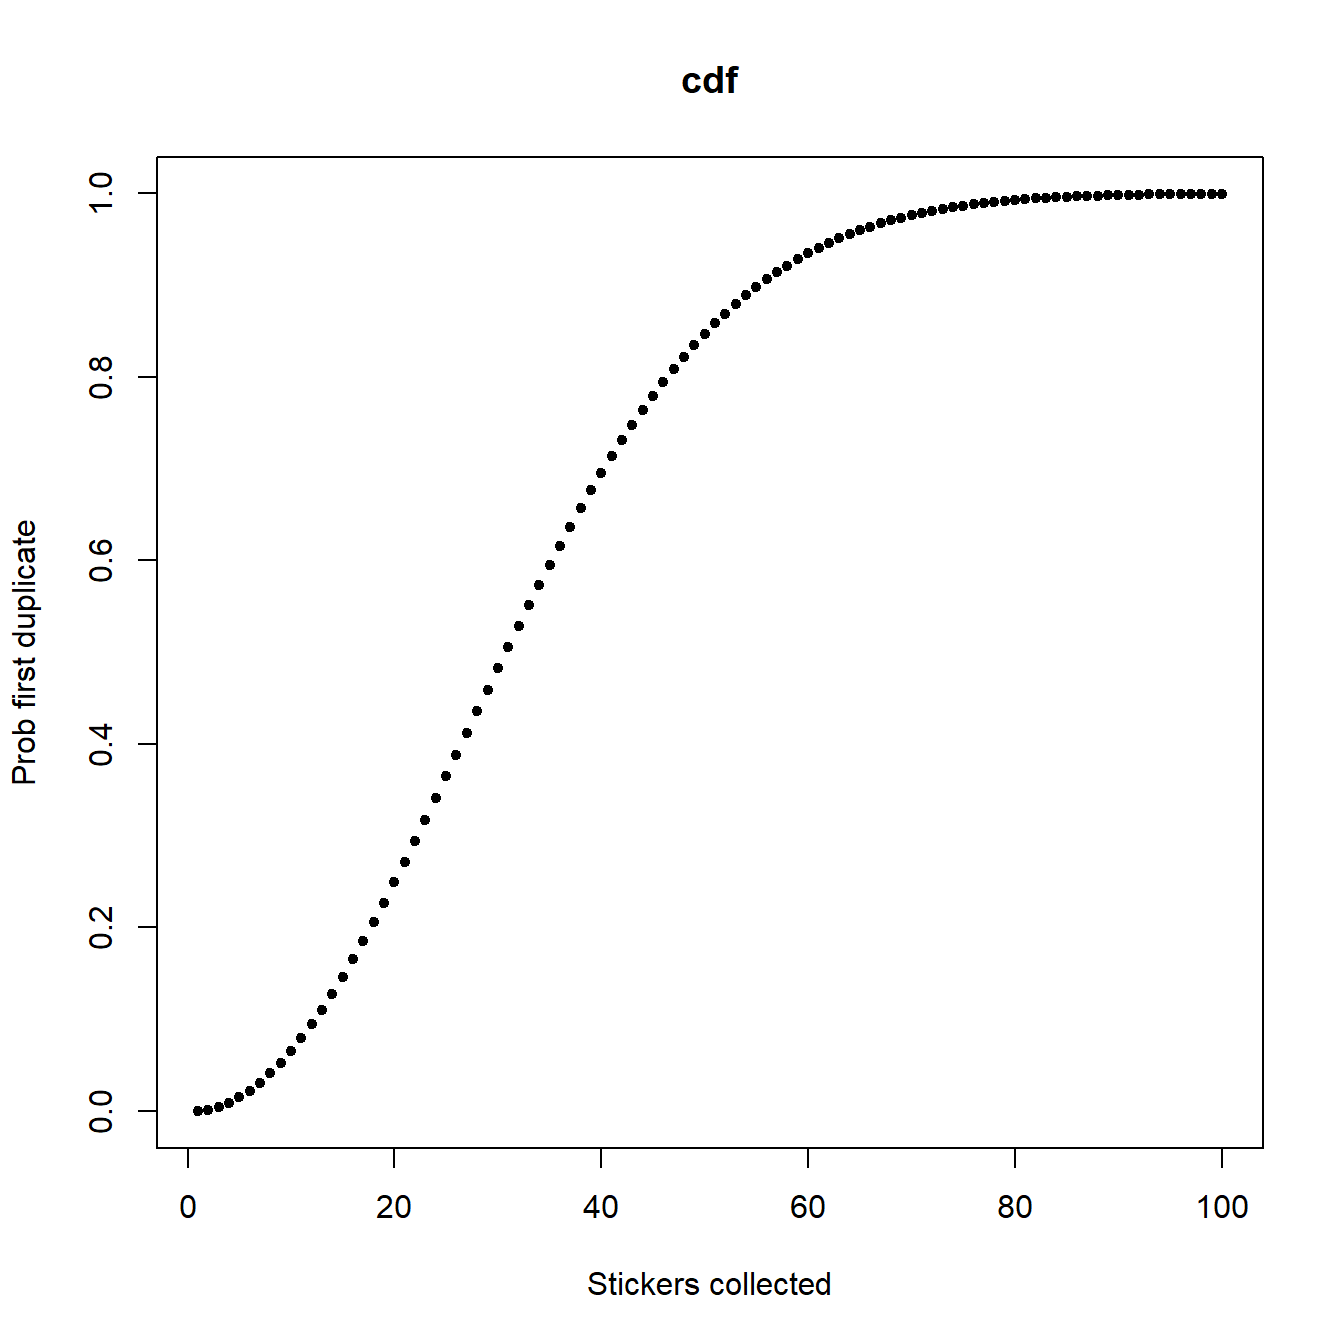 Probability of first duplicate by the $k^{th}$ sticker